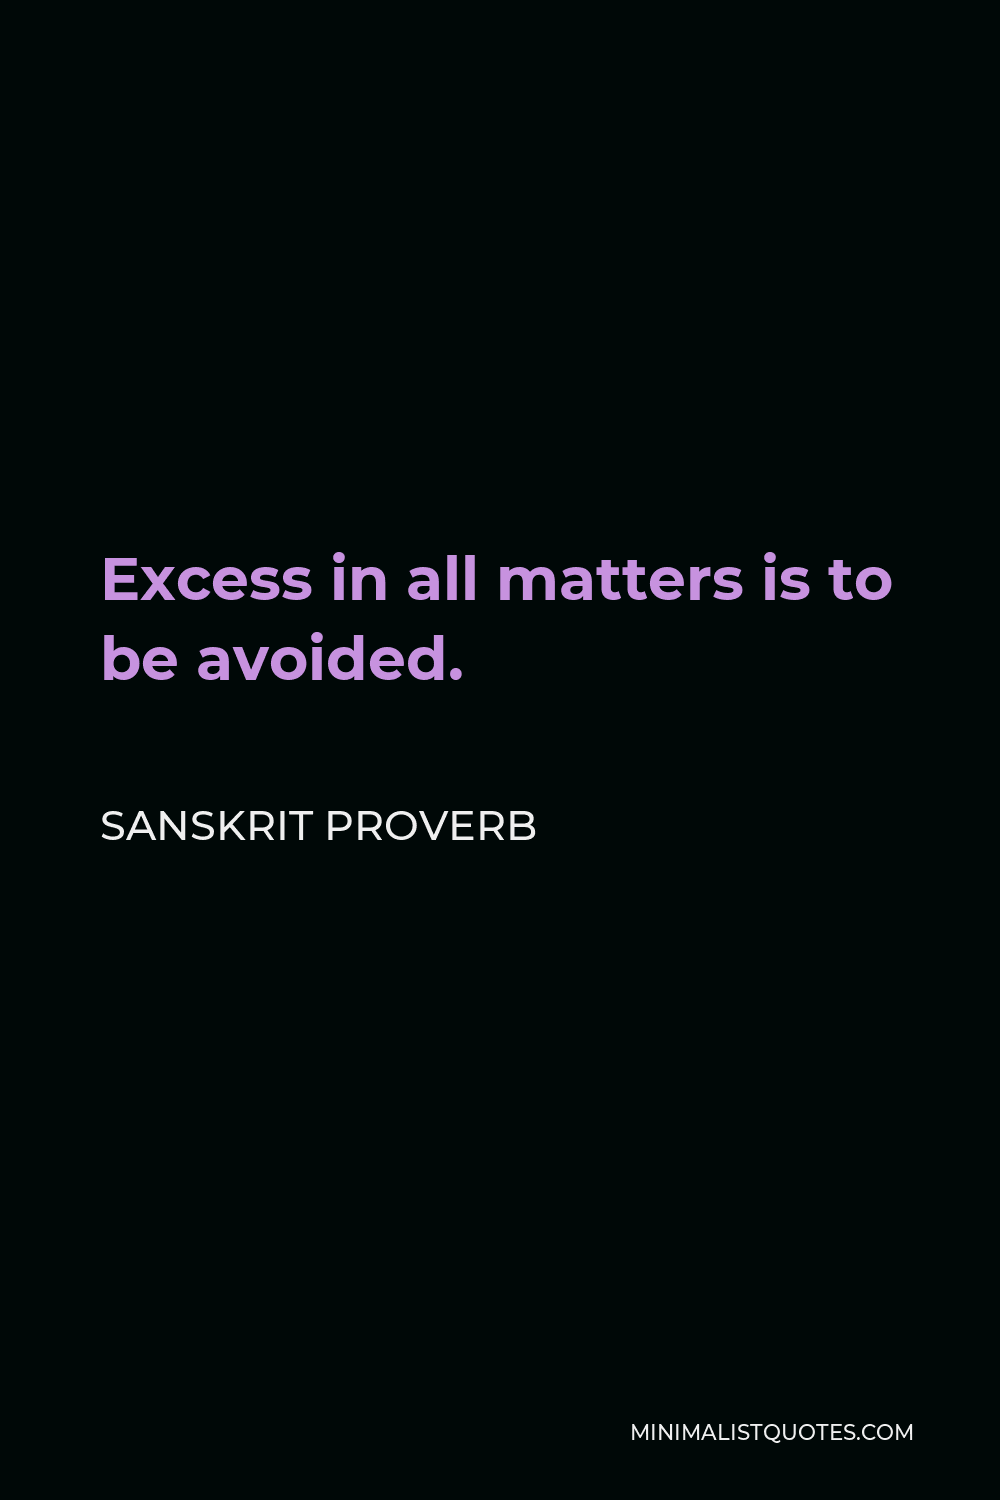 Sanskrit Proverb Quote - Excess in all matters is to be avoided.